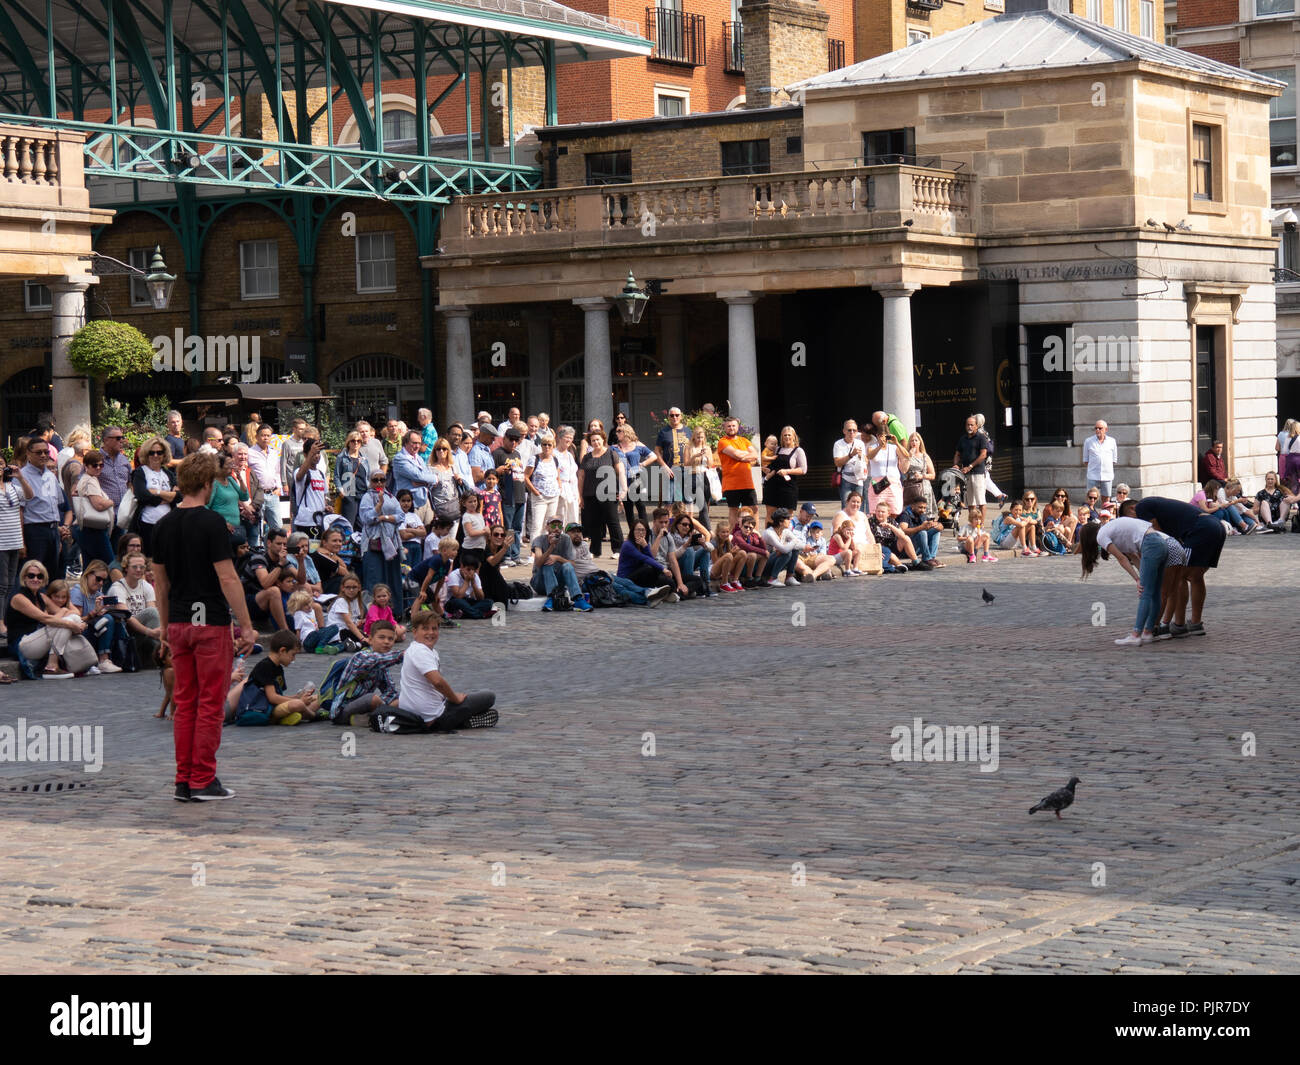 Crowds of people watch a street performance in covent Garden, London, England Stock Photo